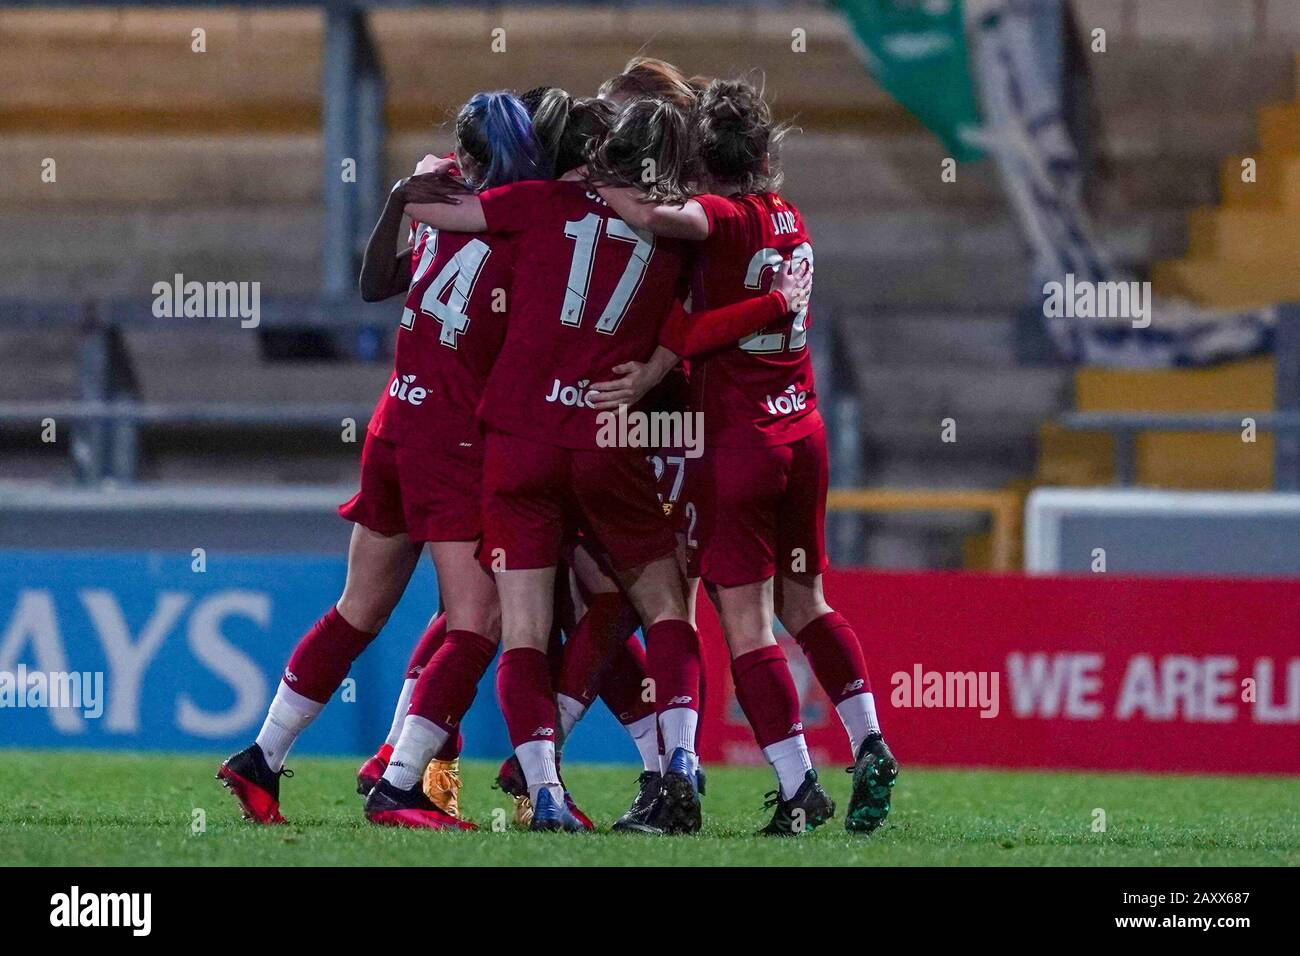 CHESTER. ENGLAND. FEB 13th: Players of Liverpool FC Women celebrate Rinsola Babajide's goal during the Women’s Super League game between Liverpool Women and Arsenal Women at The Deva Stadium in Chester, England. (Photo by Daniela Porcelli/SPP) Stock Photo